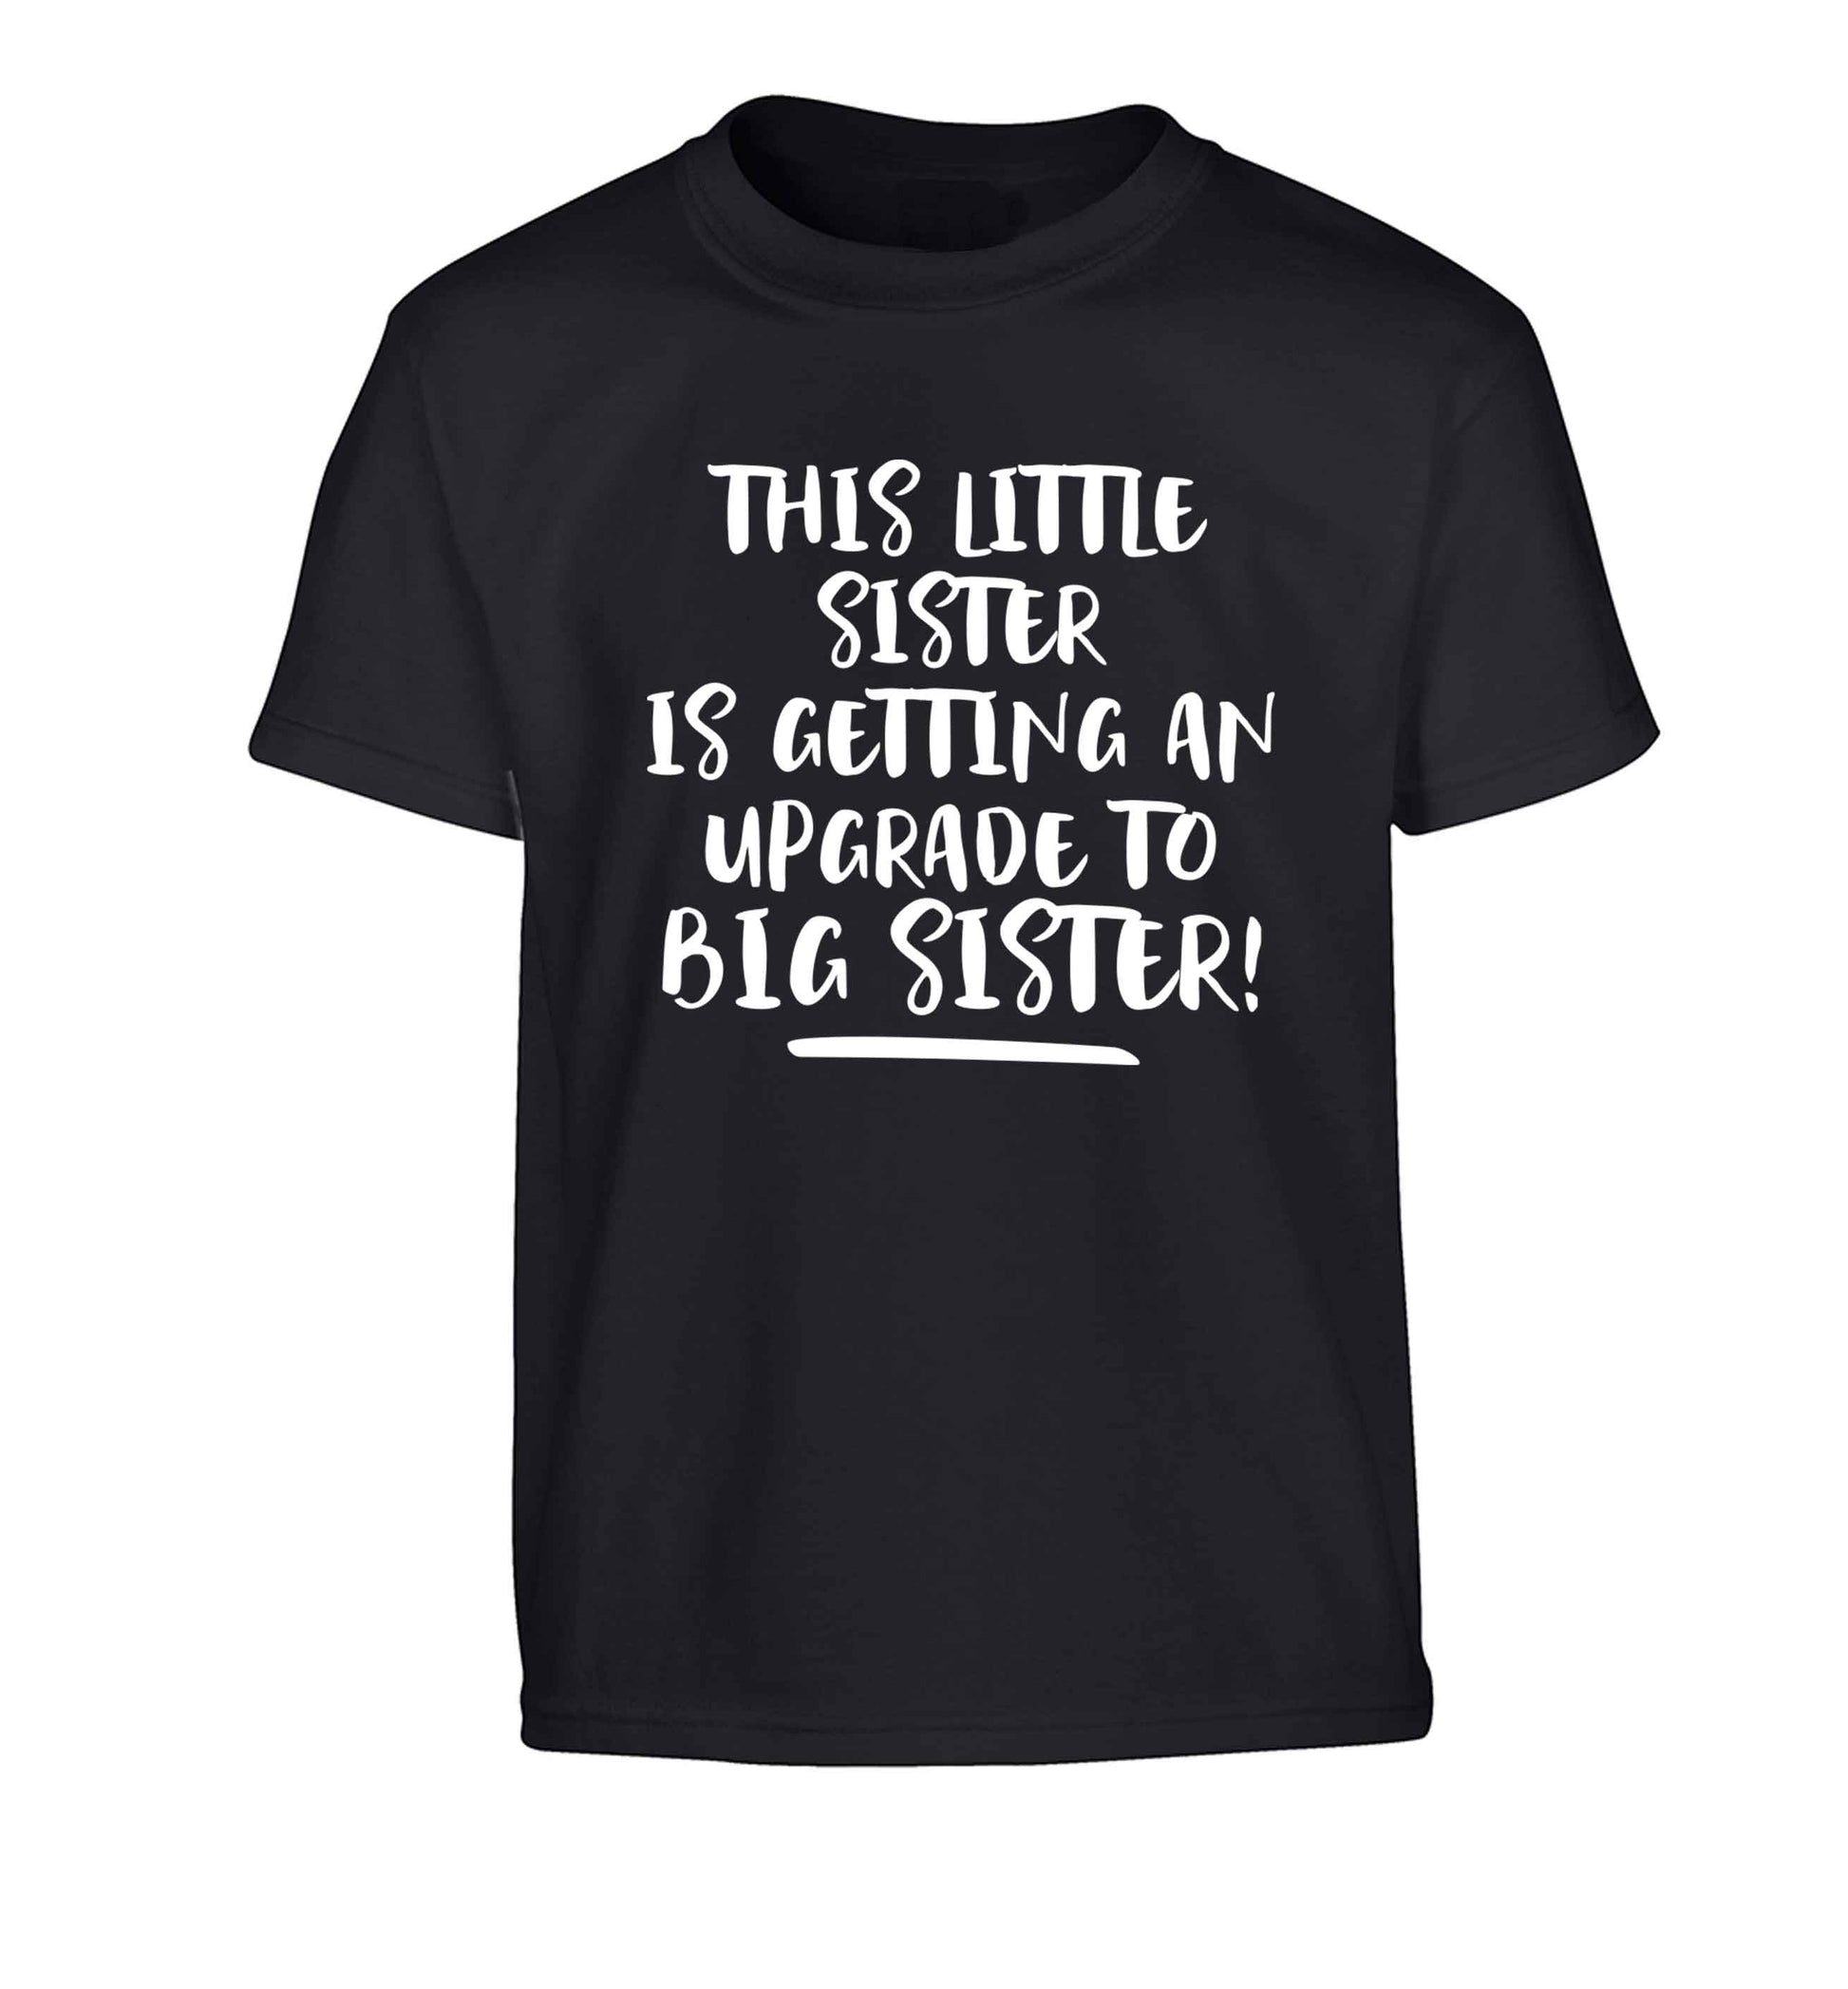 This little sister is getting an upgrade to big sister! Children's black Tshirt 12-13 Years